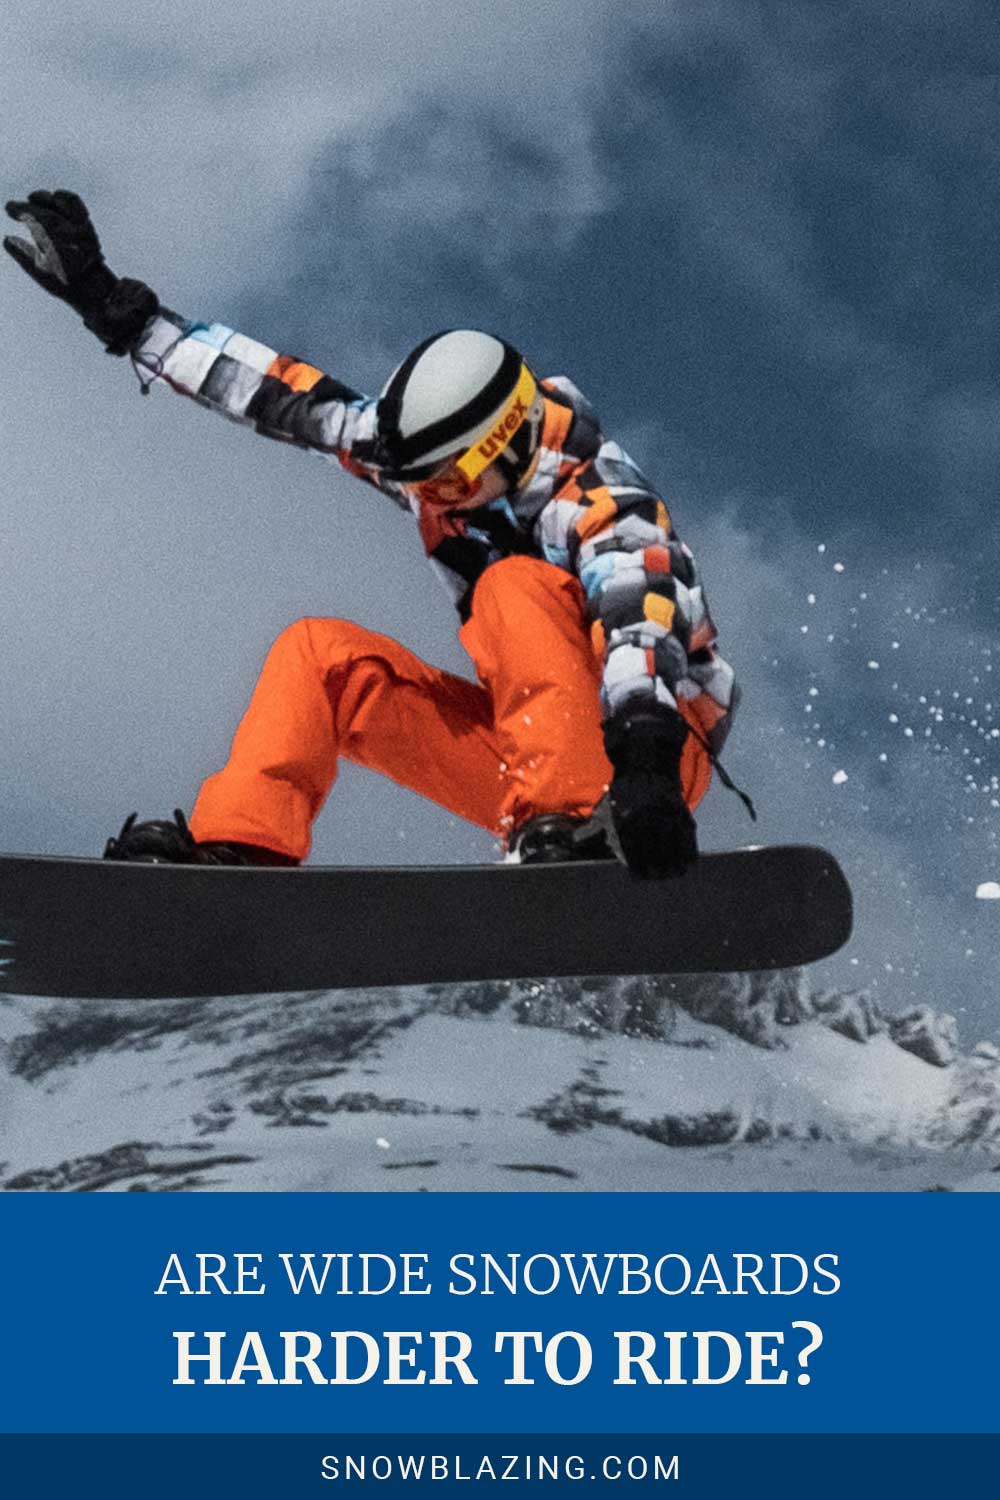 Person wearing orange pants doing aerial with a snowboard - Are Wide Snowboards Harder To Ride?